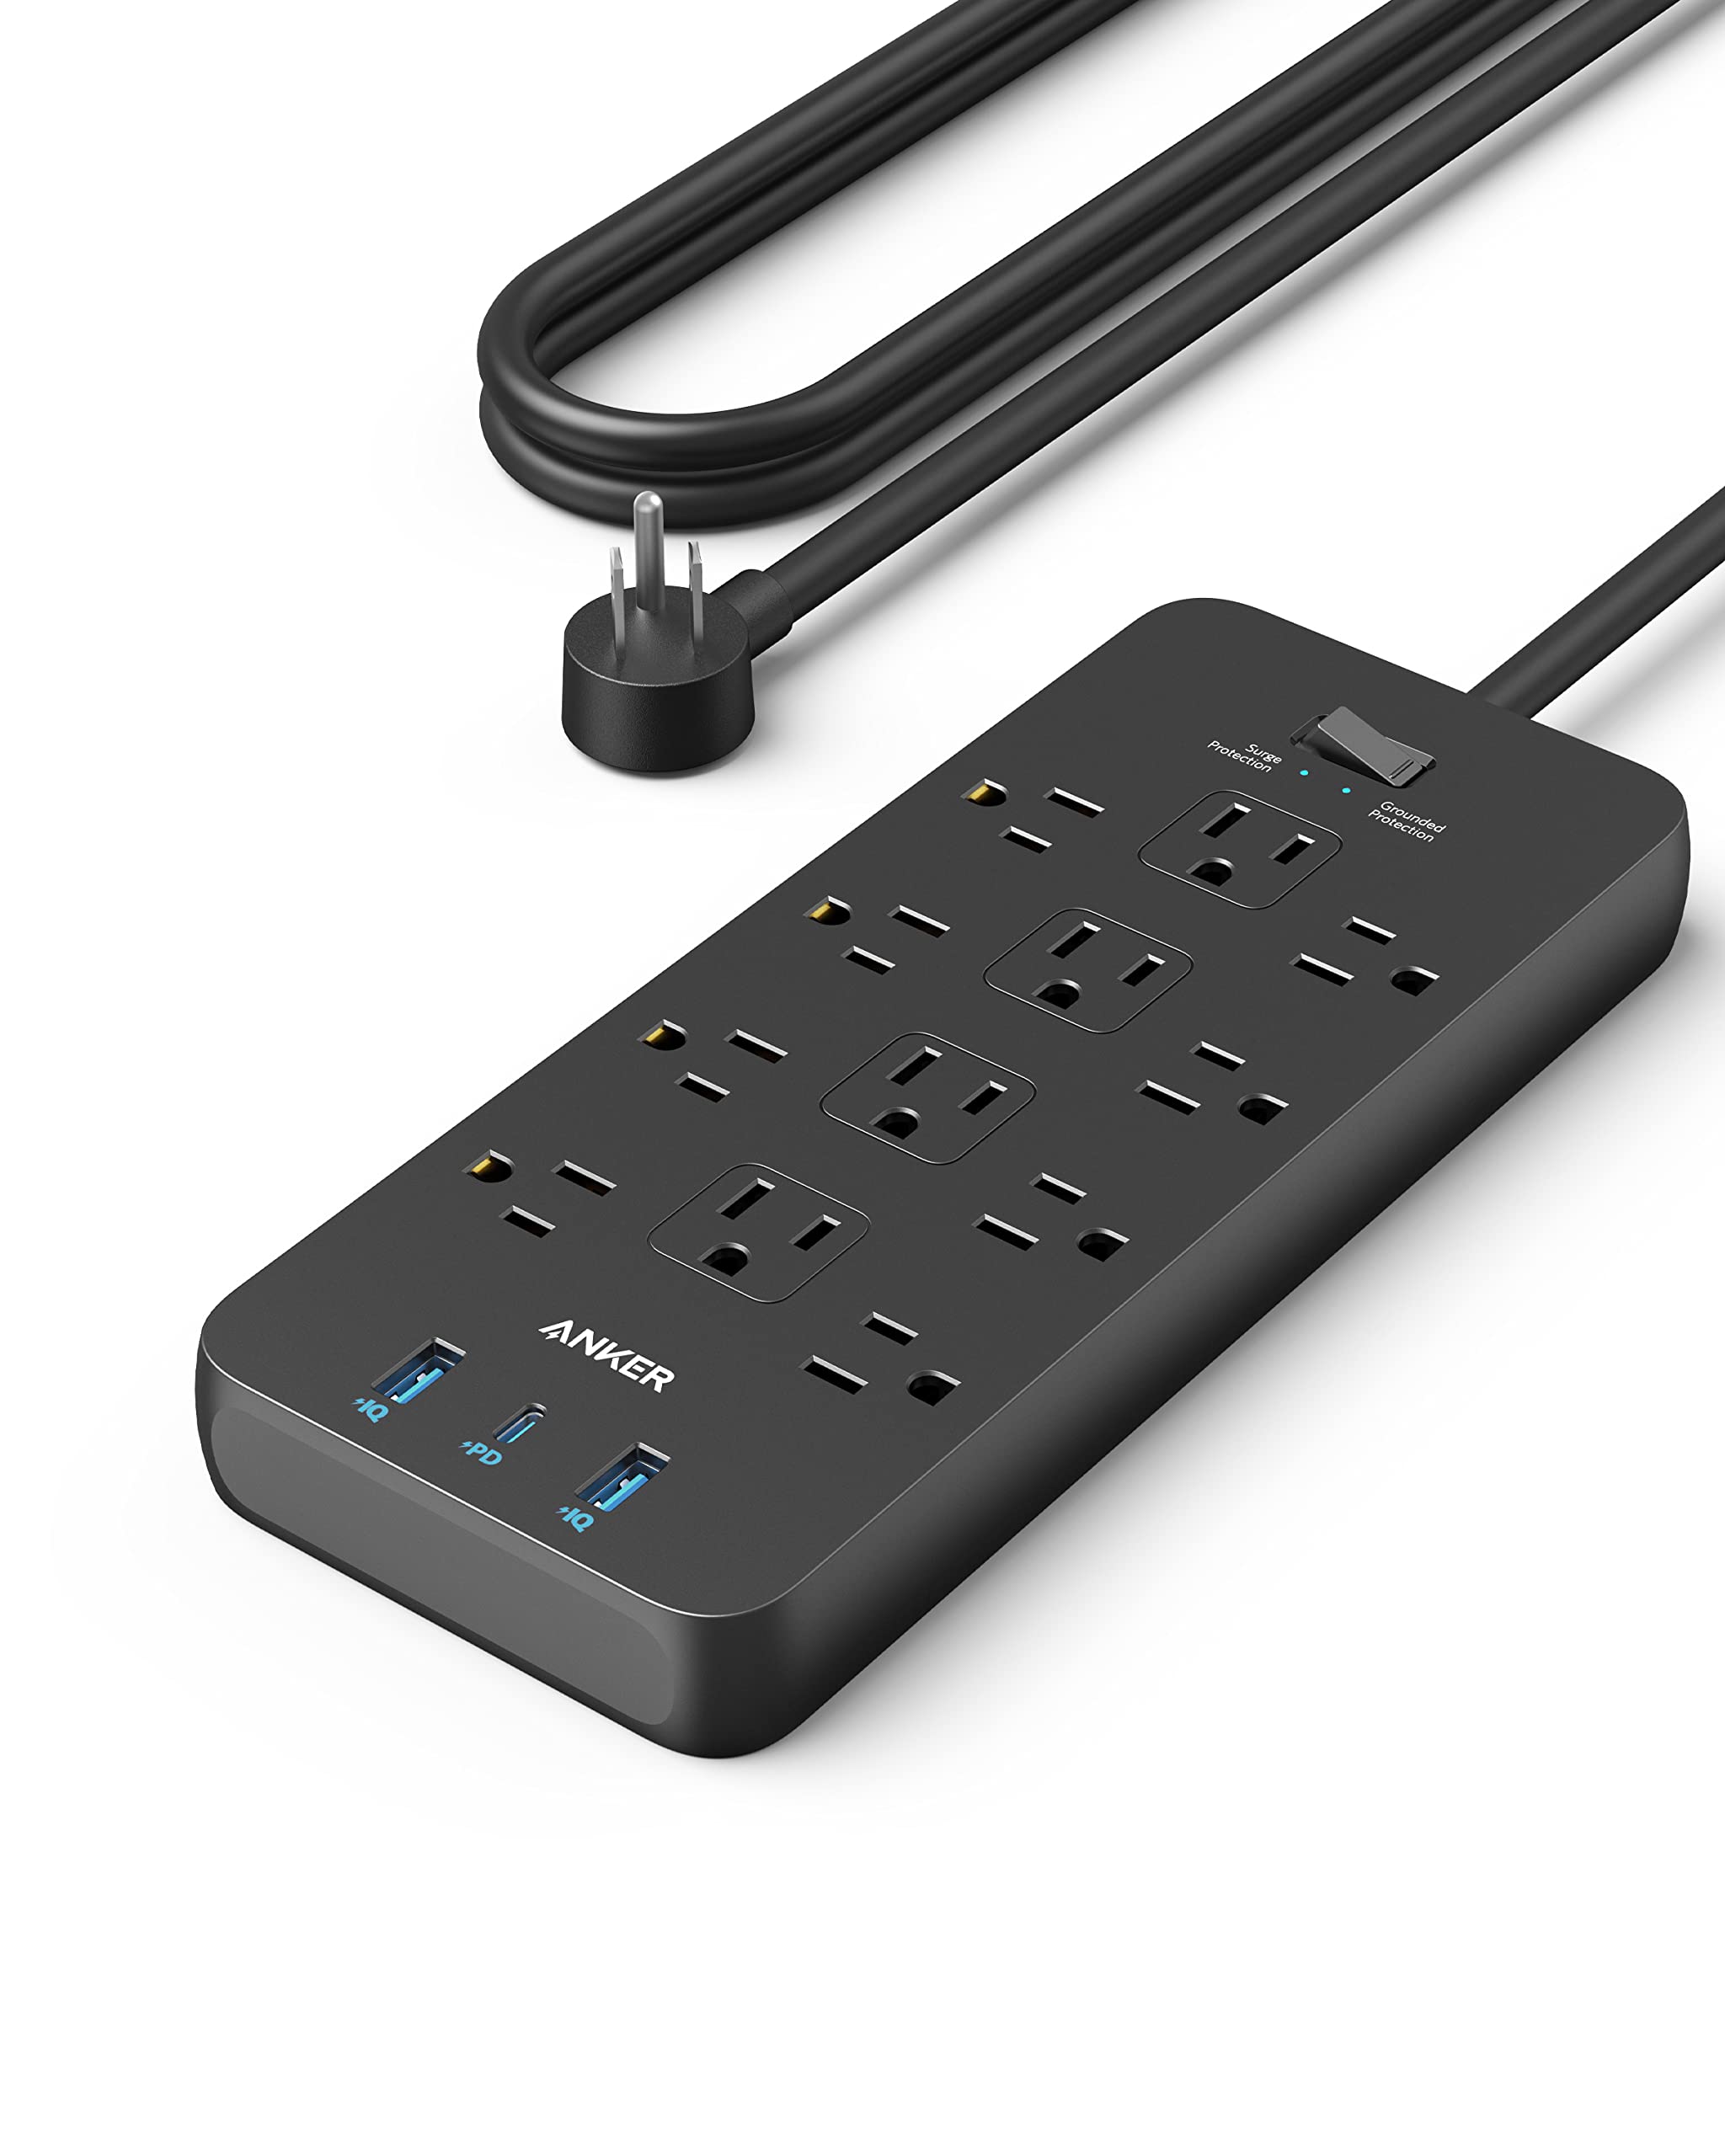 Anker Power Strip 2100J 12-Outlet Surge Protector w/ 2x USB A + 1 USB C Port on sale for $21.99